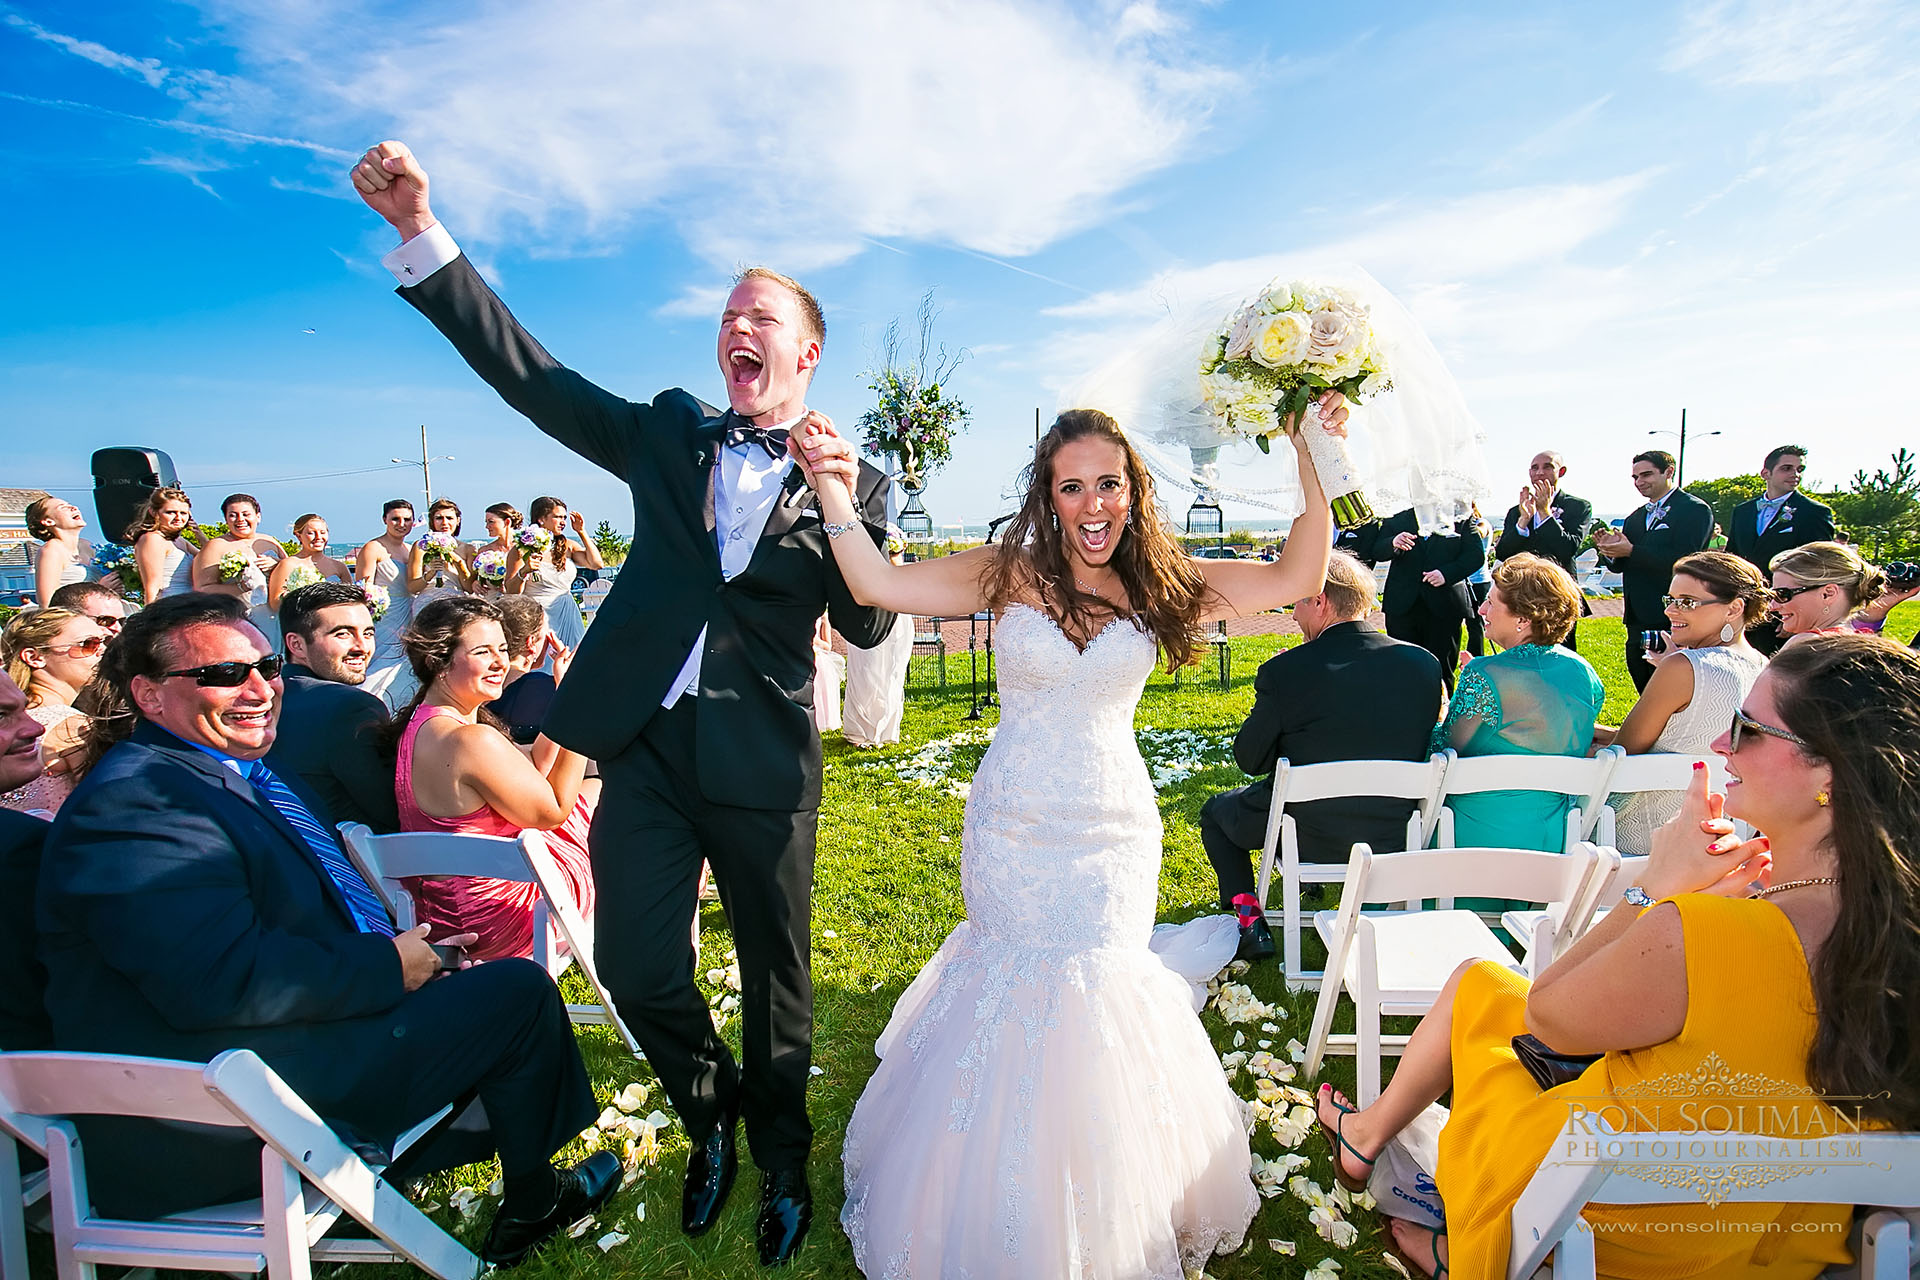 CONGRESS HALL WEDDING in cape may, new jersey